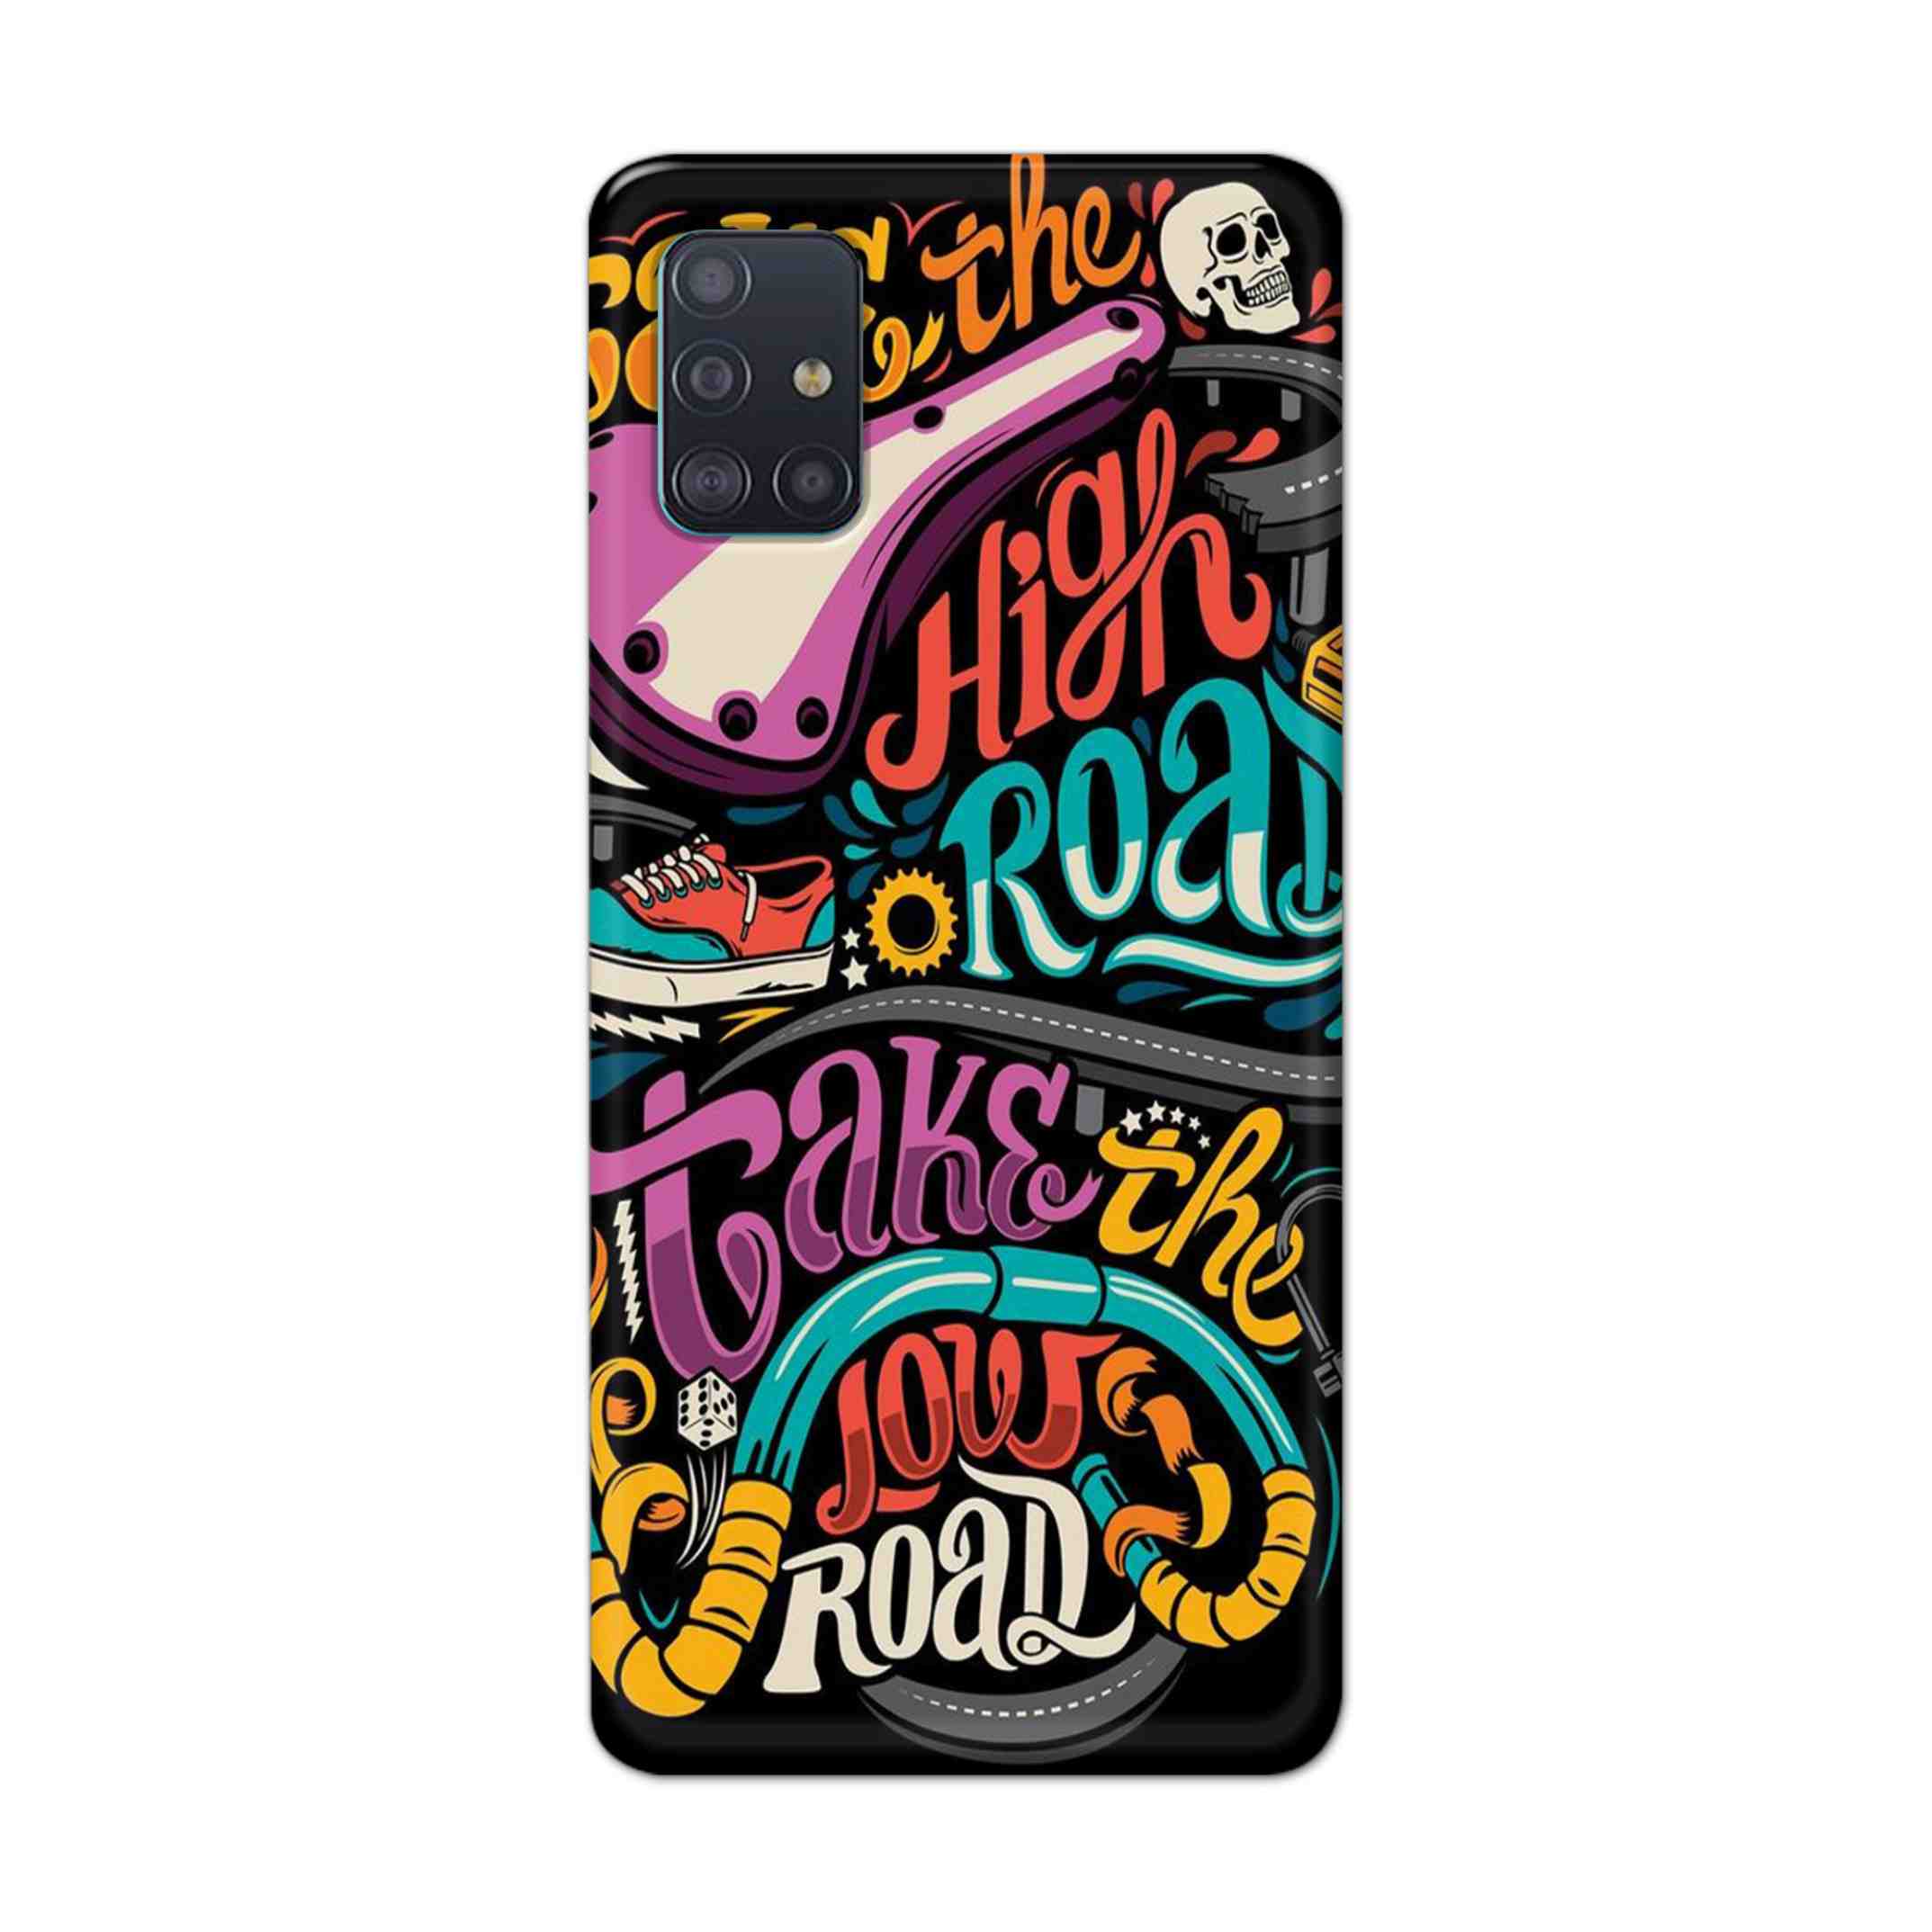 Buy Take The High Road Hard Back Mobile Phone Case Cover For Samsung Galaxy A71 Online